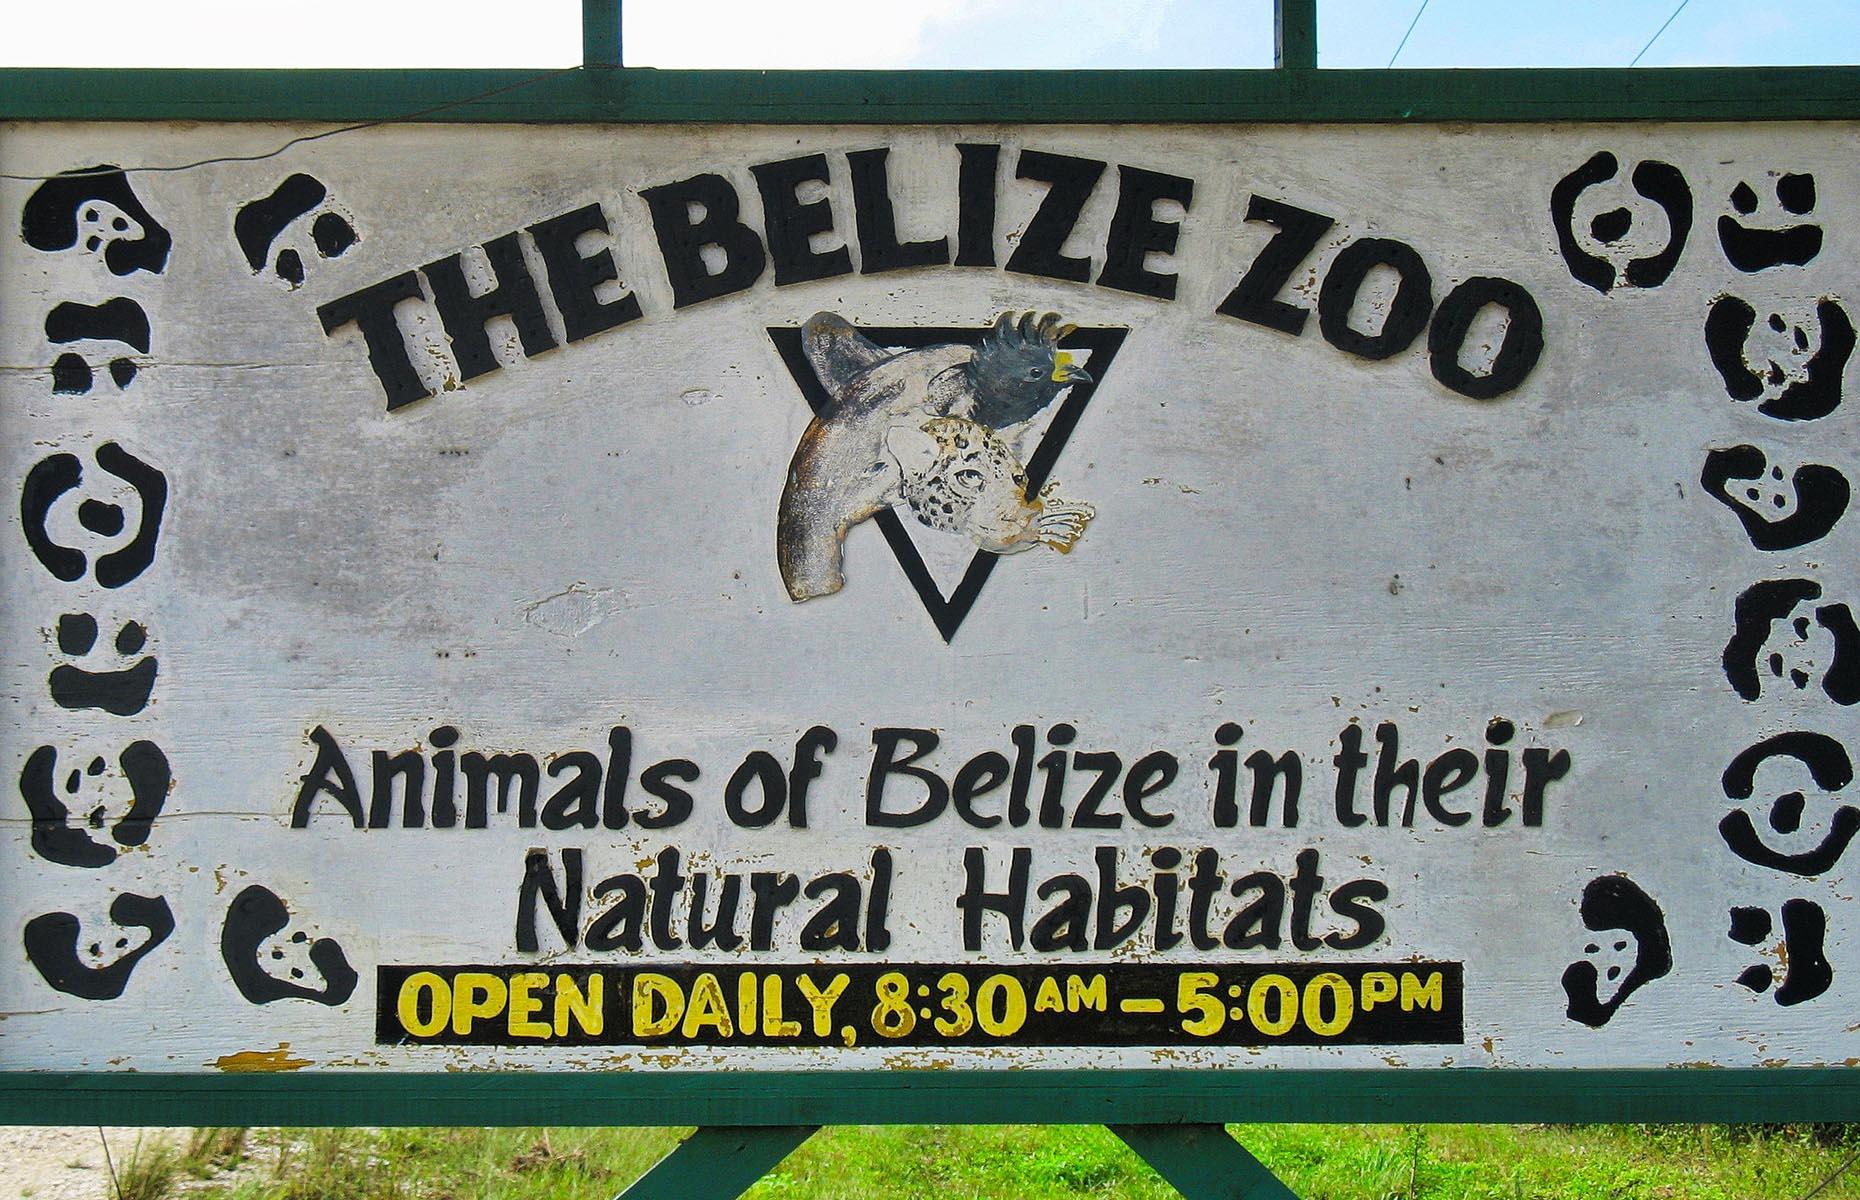 <p>It may sound strange to fly to the home of so many fascinating creatures only to see them in captivity, but the Belize Zoo prides itself on being a rescue and rehabilitation facility as much as a place where children can gawp through glass. The zoo, just off the busy George Price Highway, takes in animals retrieved from the illegal wildlife trade, and enclosures are carefully designed to reflect natural habitats. You'll see animals that, realistically, you'd be exceptionally lucky to see in the wild, including long-nosed tapirs, nicknamed 'mountain cows;' margays and ocelots, both small, spotted, jaguar-like cats; and harpy eagles, giant jungle raptors with notoriously intimidating plumage.</p>